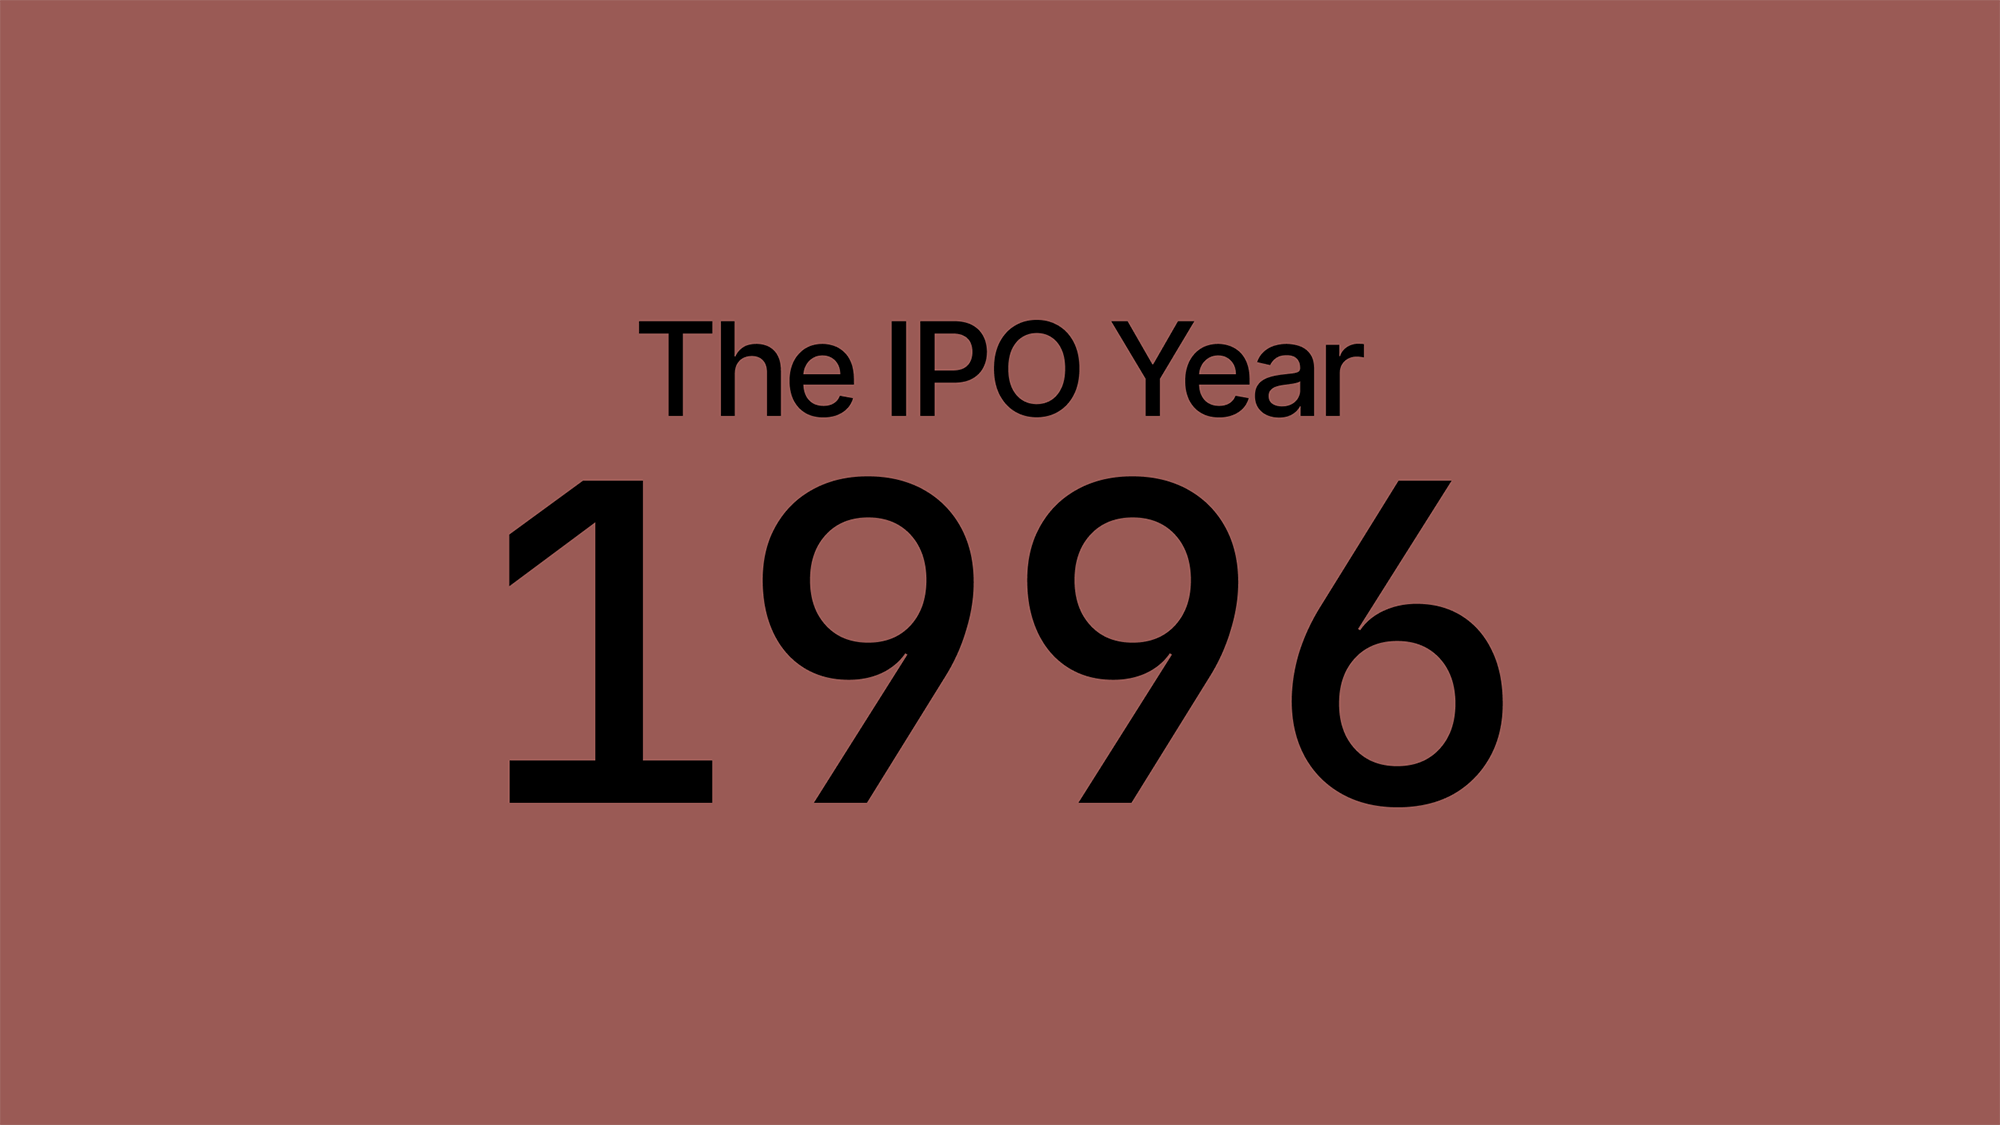 The IPO Year 1996